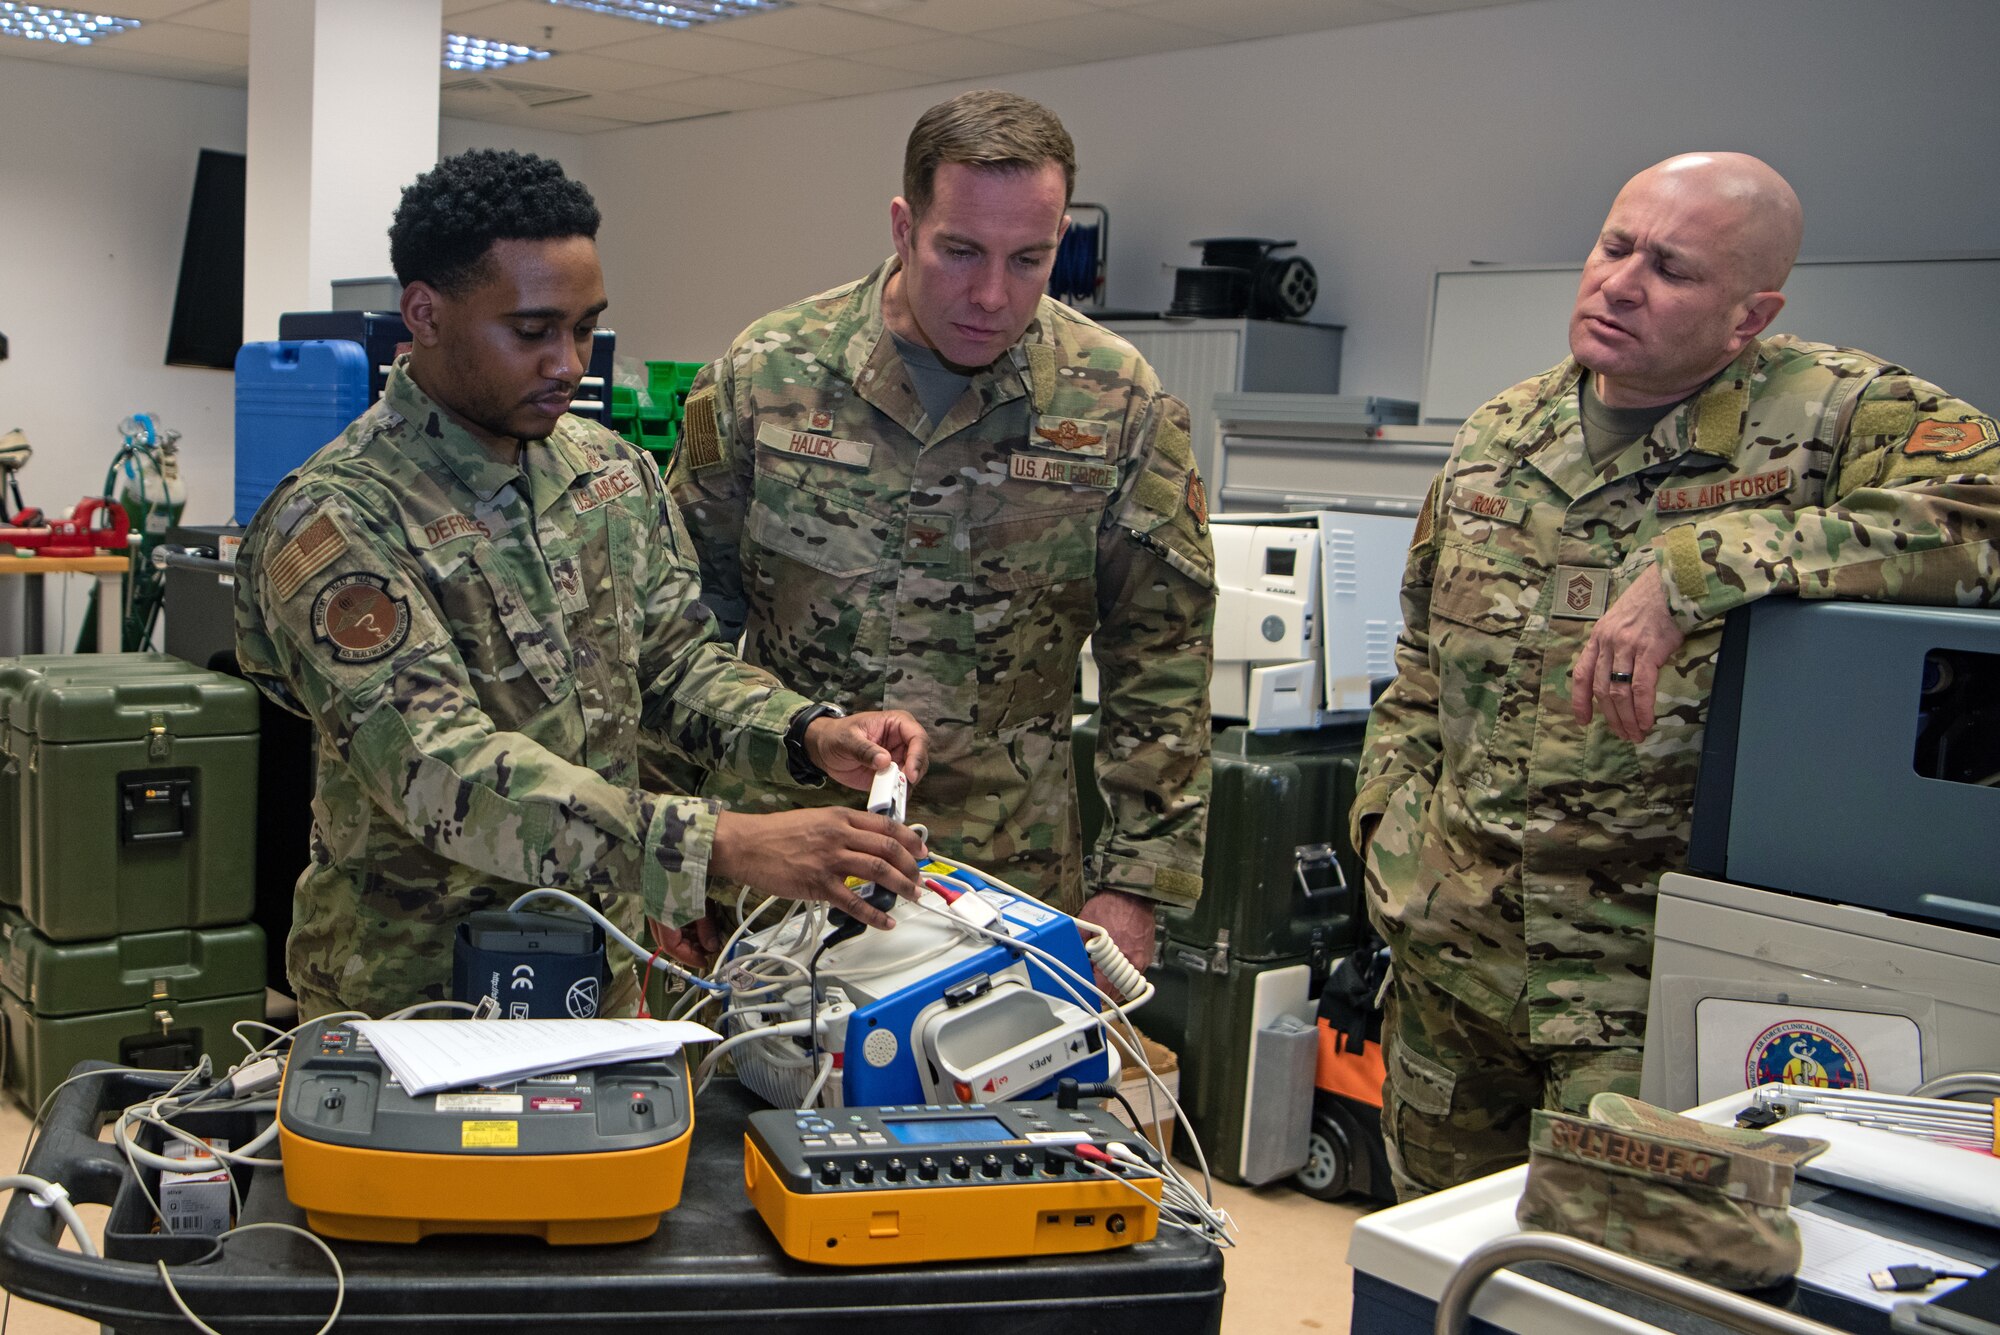 man powers on medical equipment with wing leadership